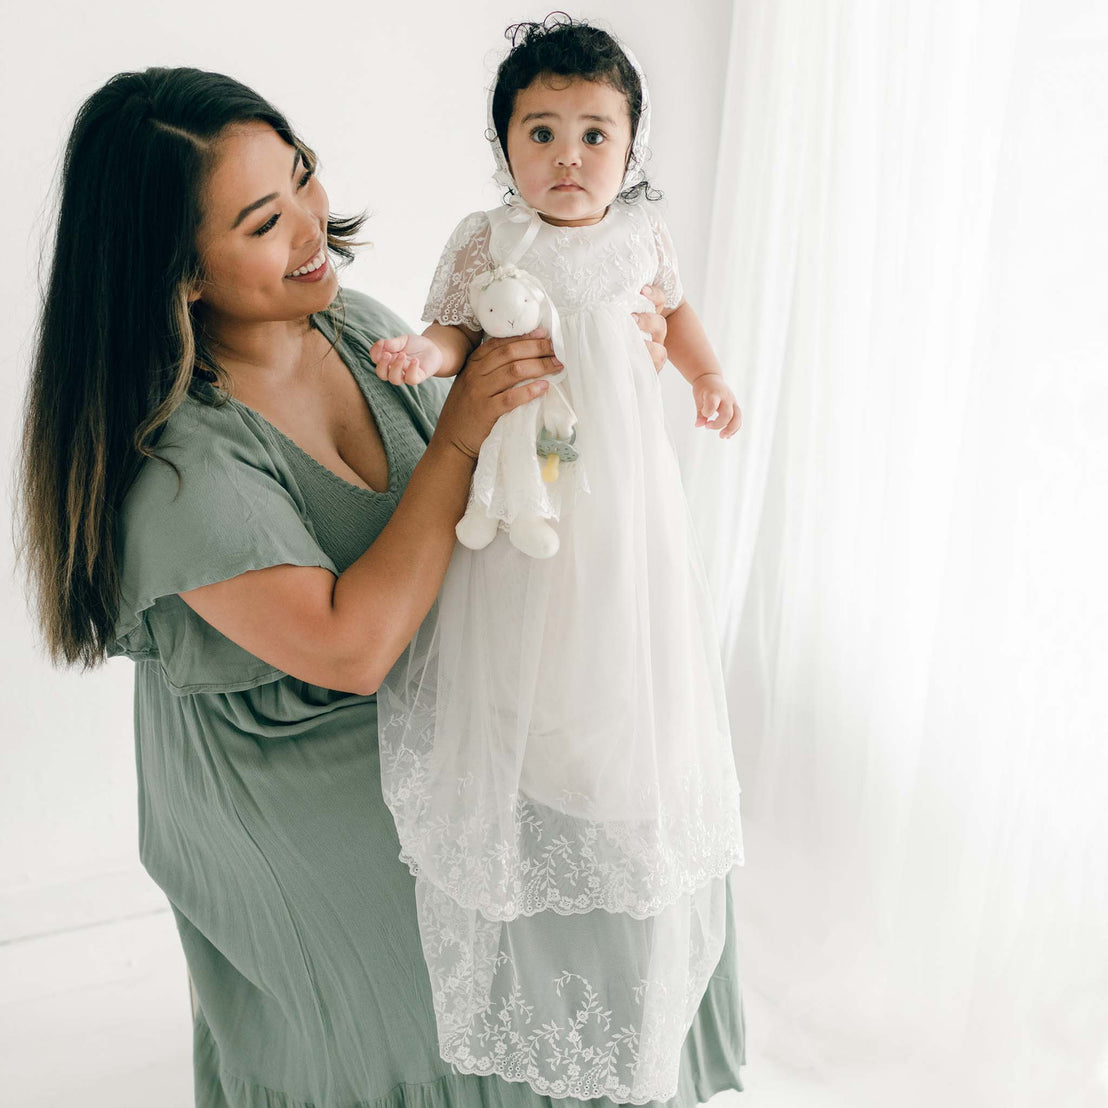 A woman in a green dress holds a baby dressed in an Ella Christening Gown, an exquisite vintage heirloom style piece adorned with embroidered netting lace. The background is minimalistic with soft lighting and white curtains.